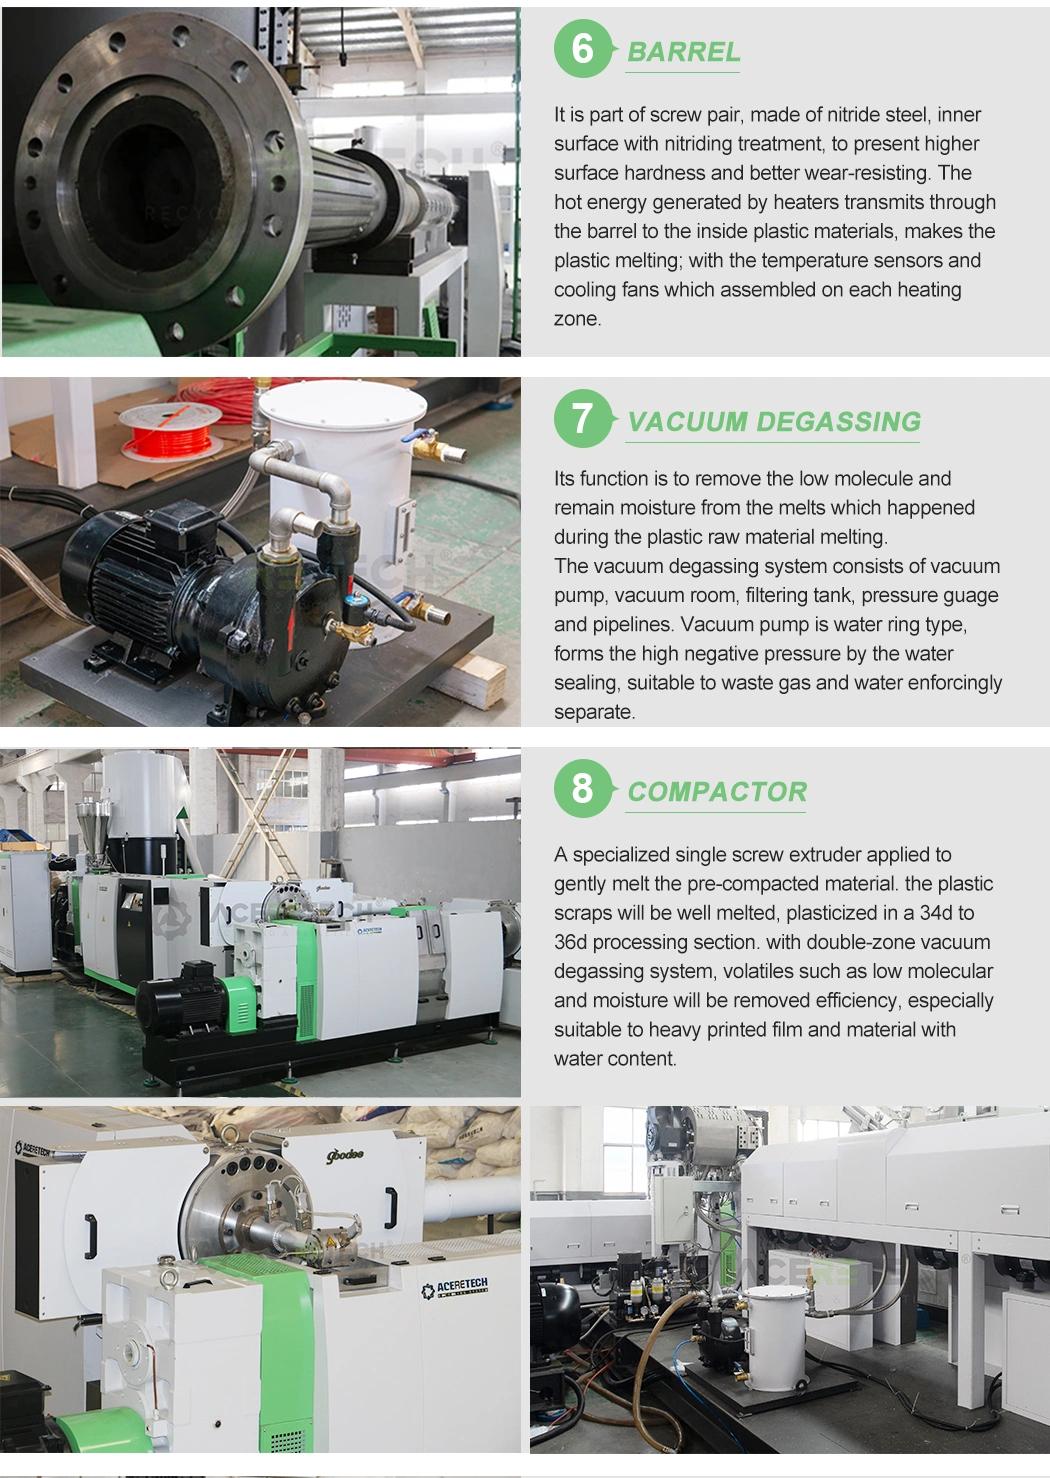 Aceretech Multifunctional Film Recycling Machine